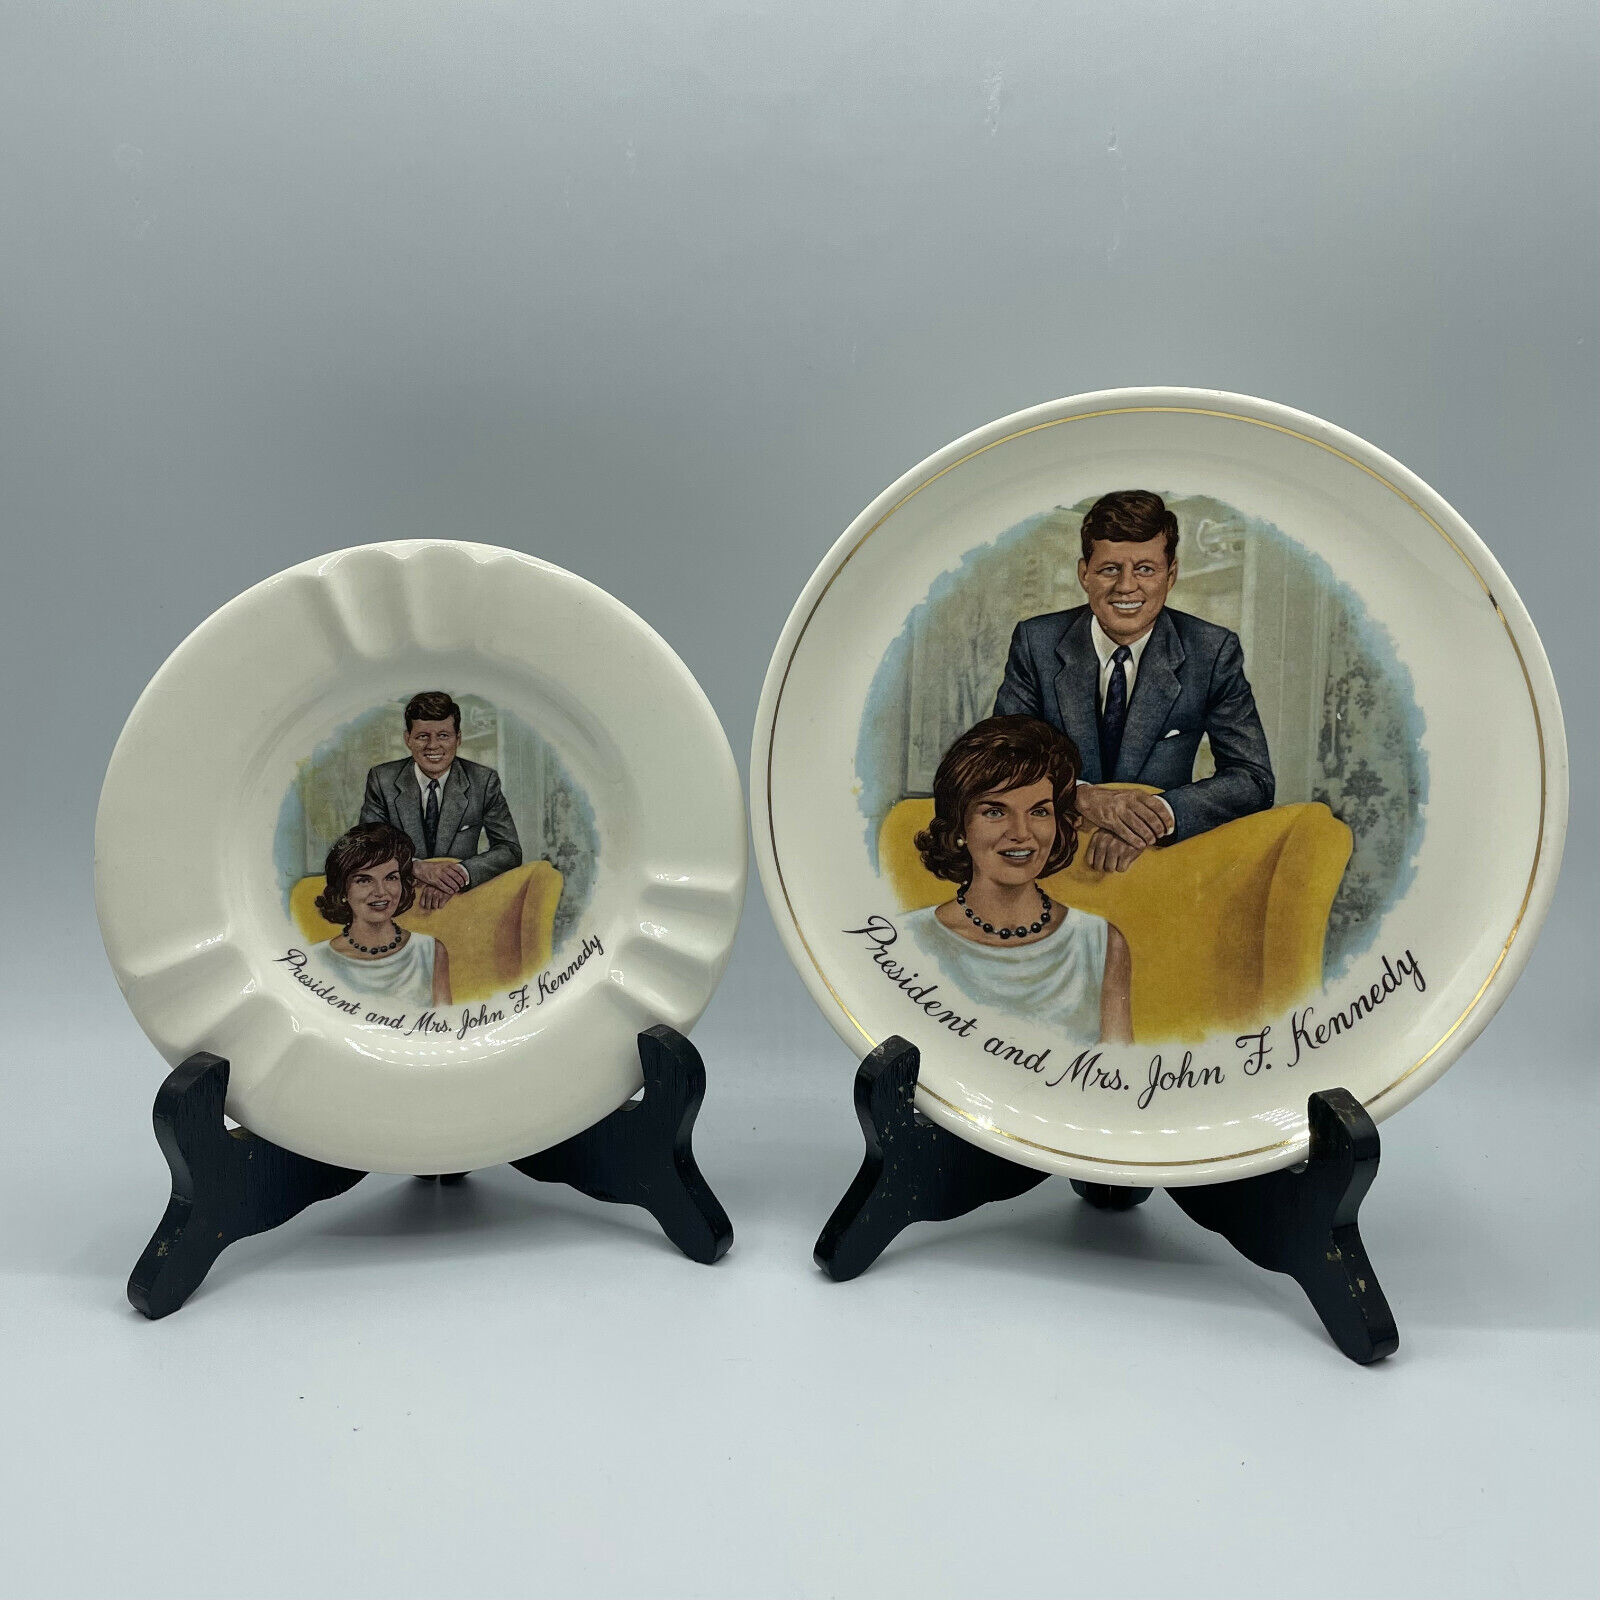 Vintage President and Mrs. John F. Kennedy Ashtray and Plate